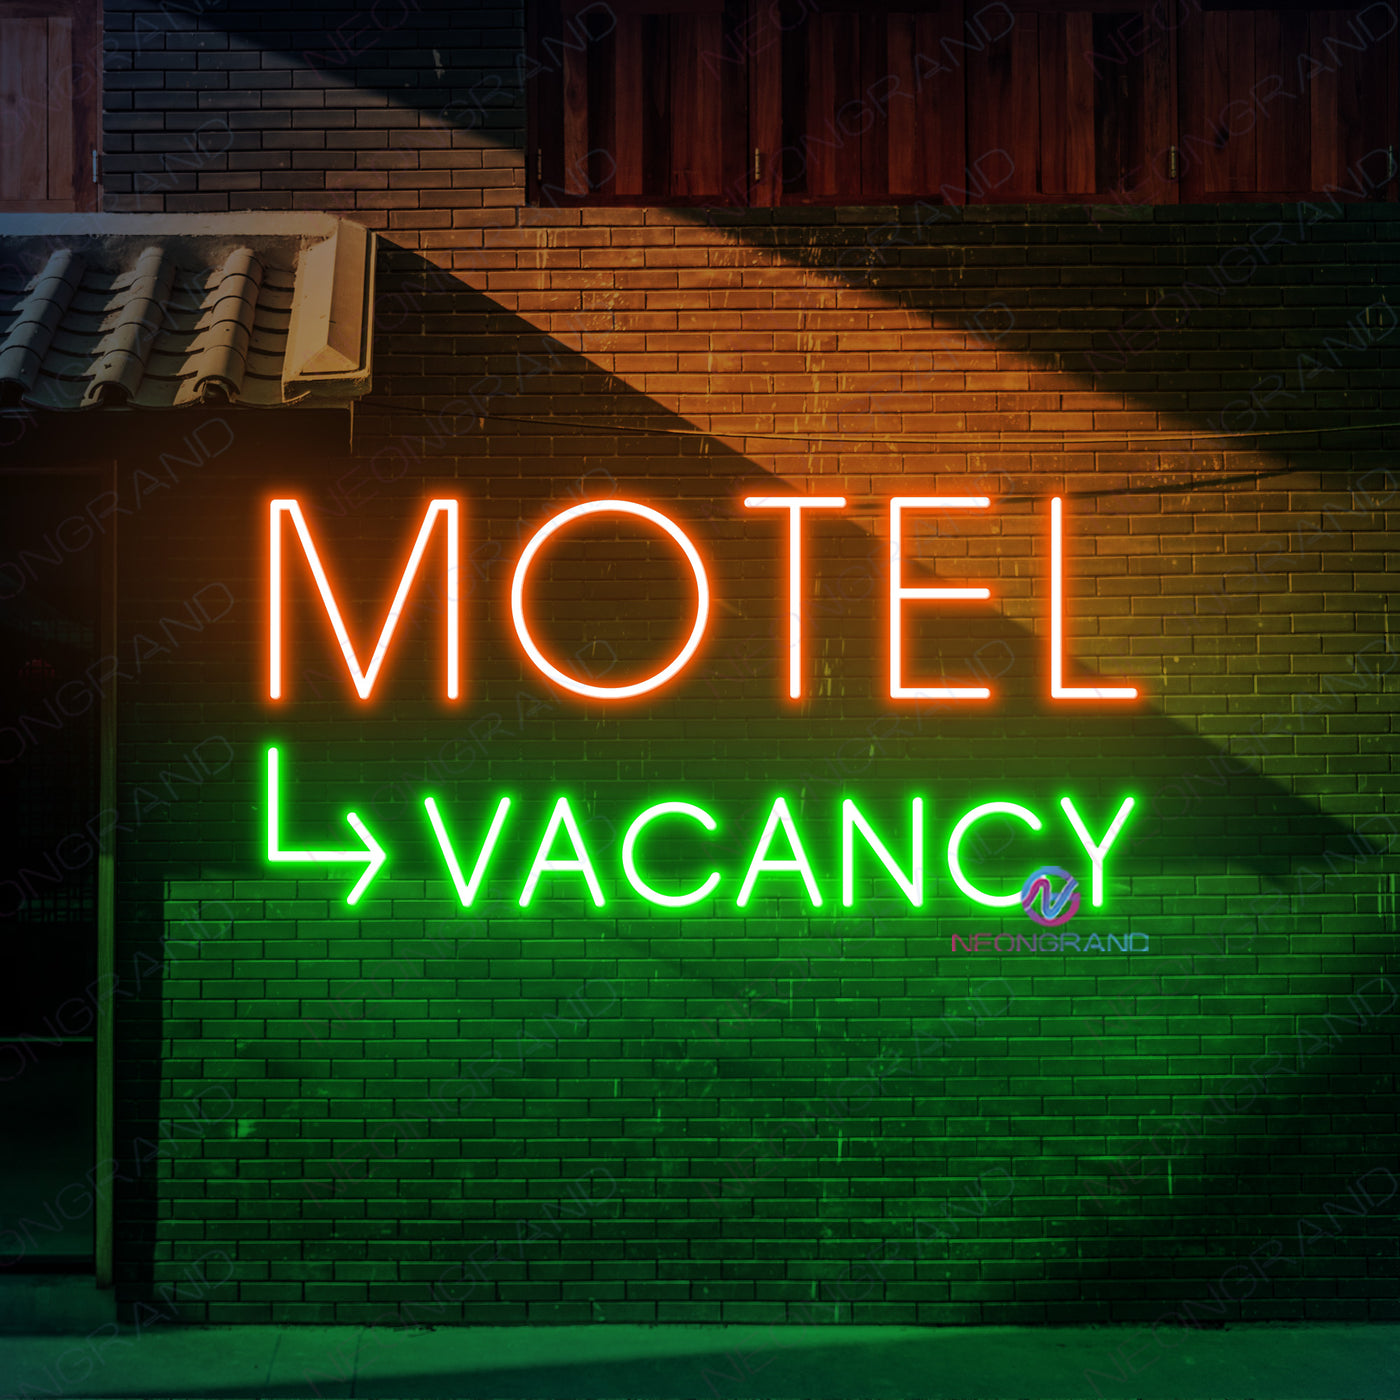 Motel Vacancy Neon Sign Business Led Light